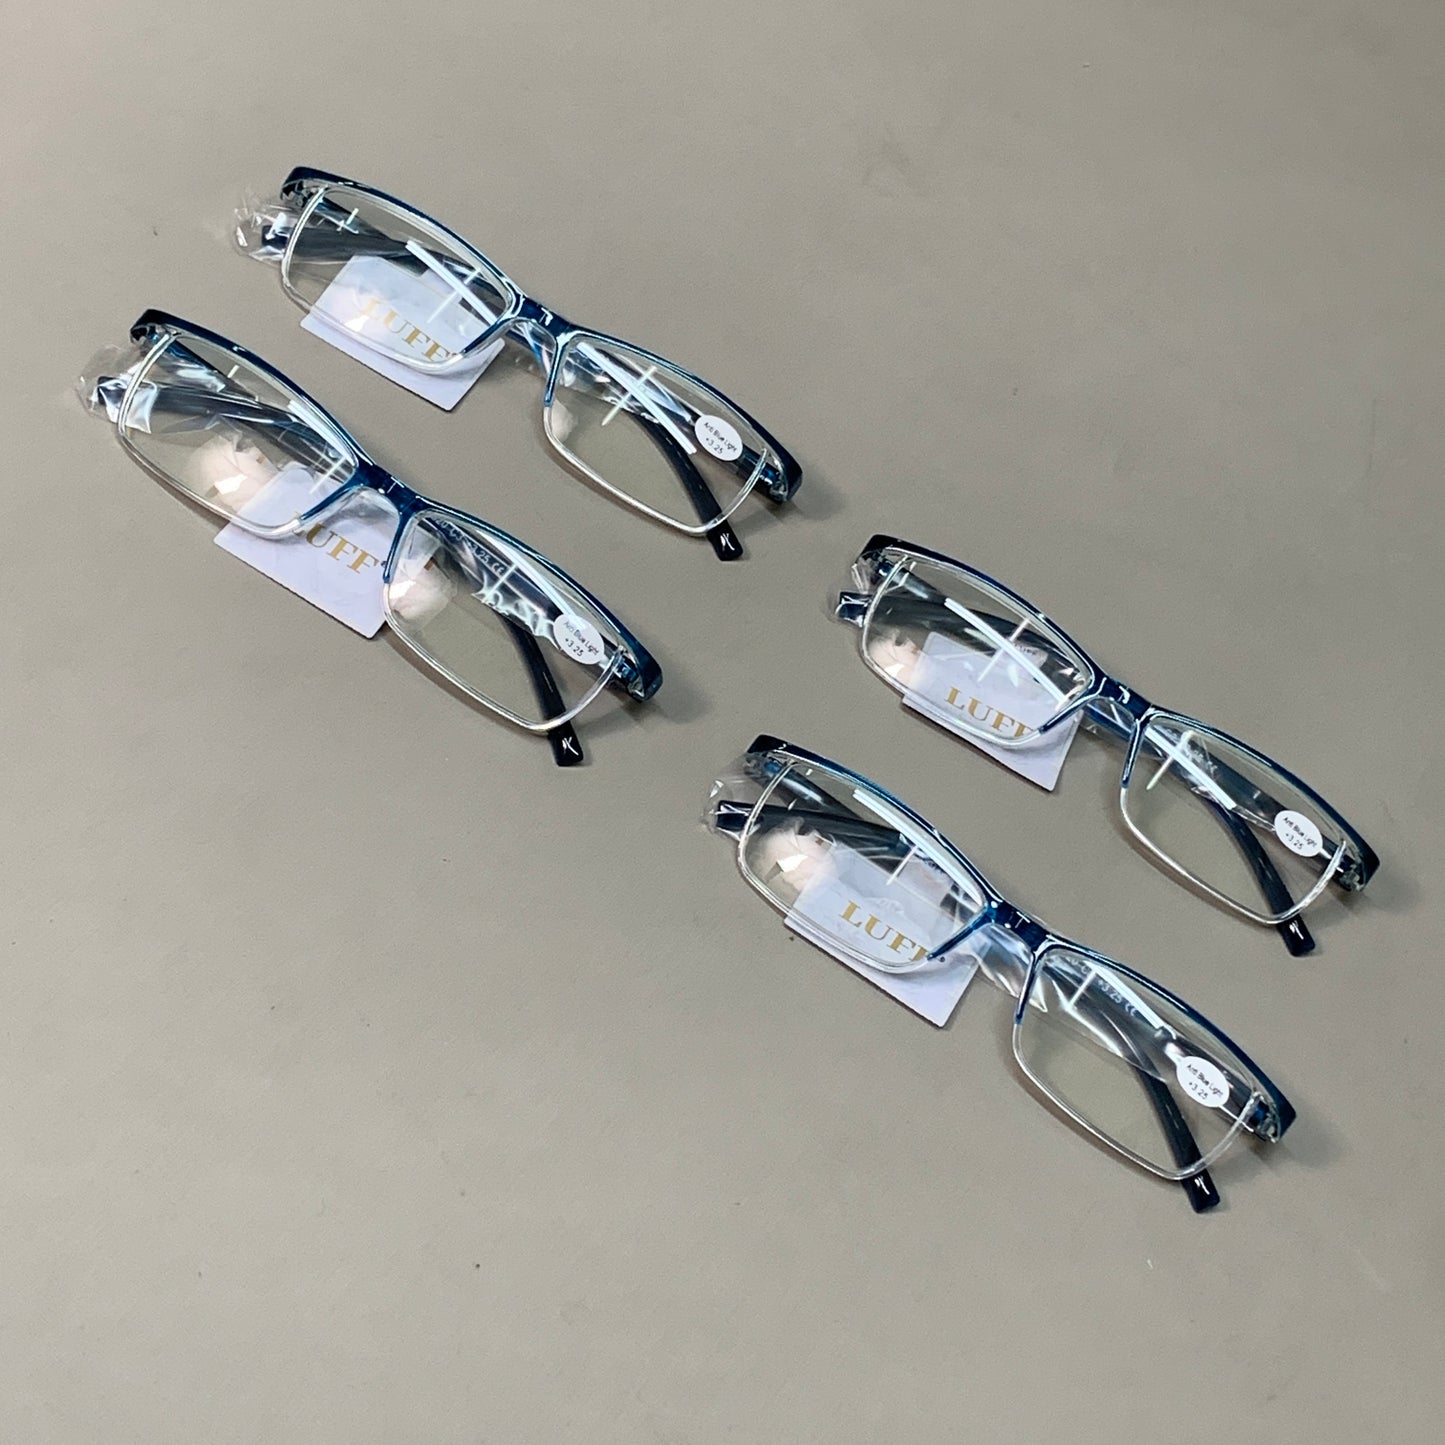 LUFF 4 PACK! Anti-Blue-Ray Reading Glasses Portable Ultra-Light Readers 3.25 (New)